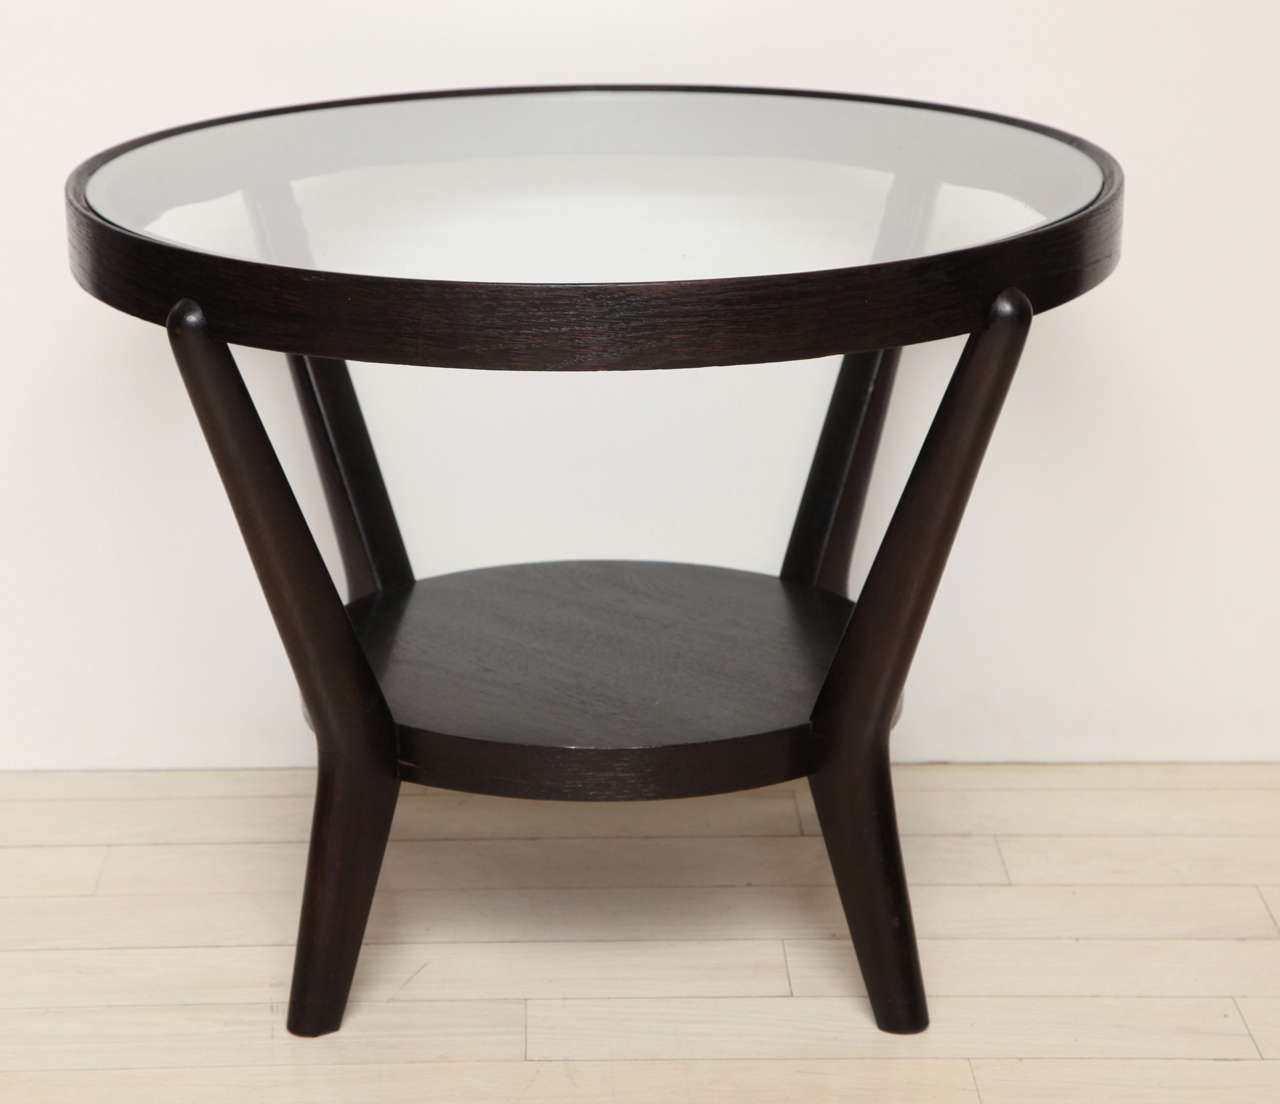 Pair of round oak two-tiered tables with glass tops by Halabala